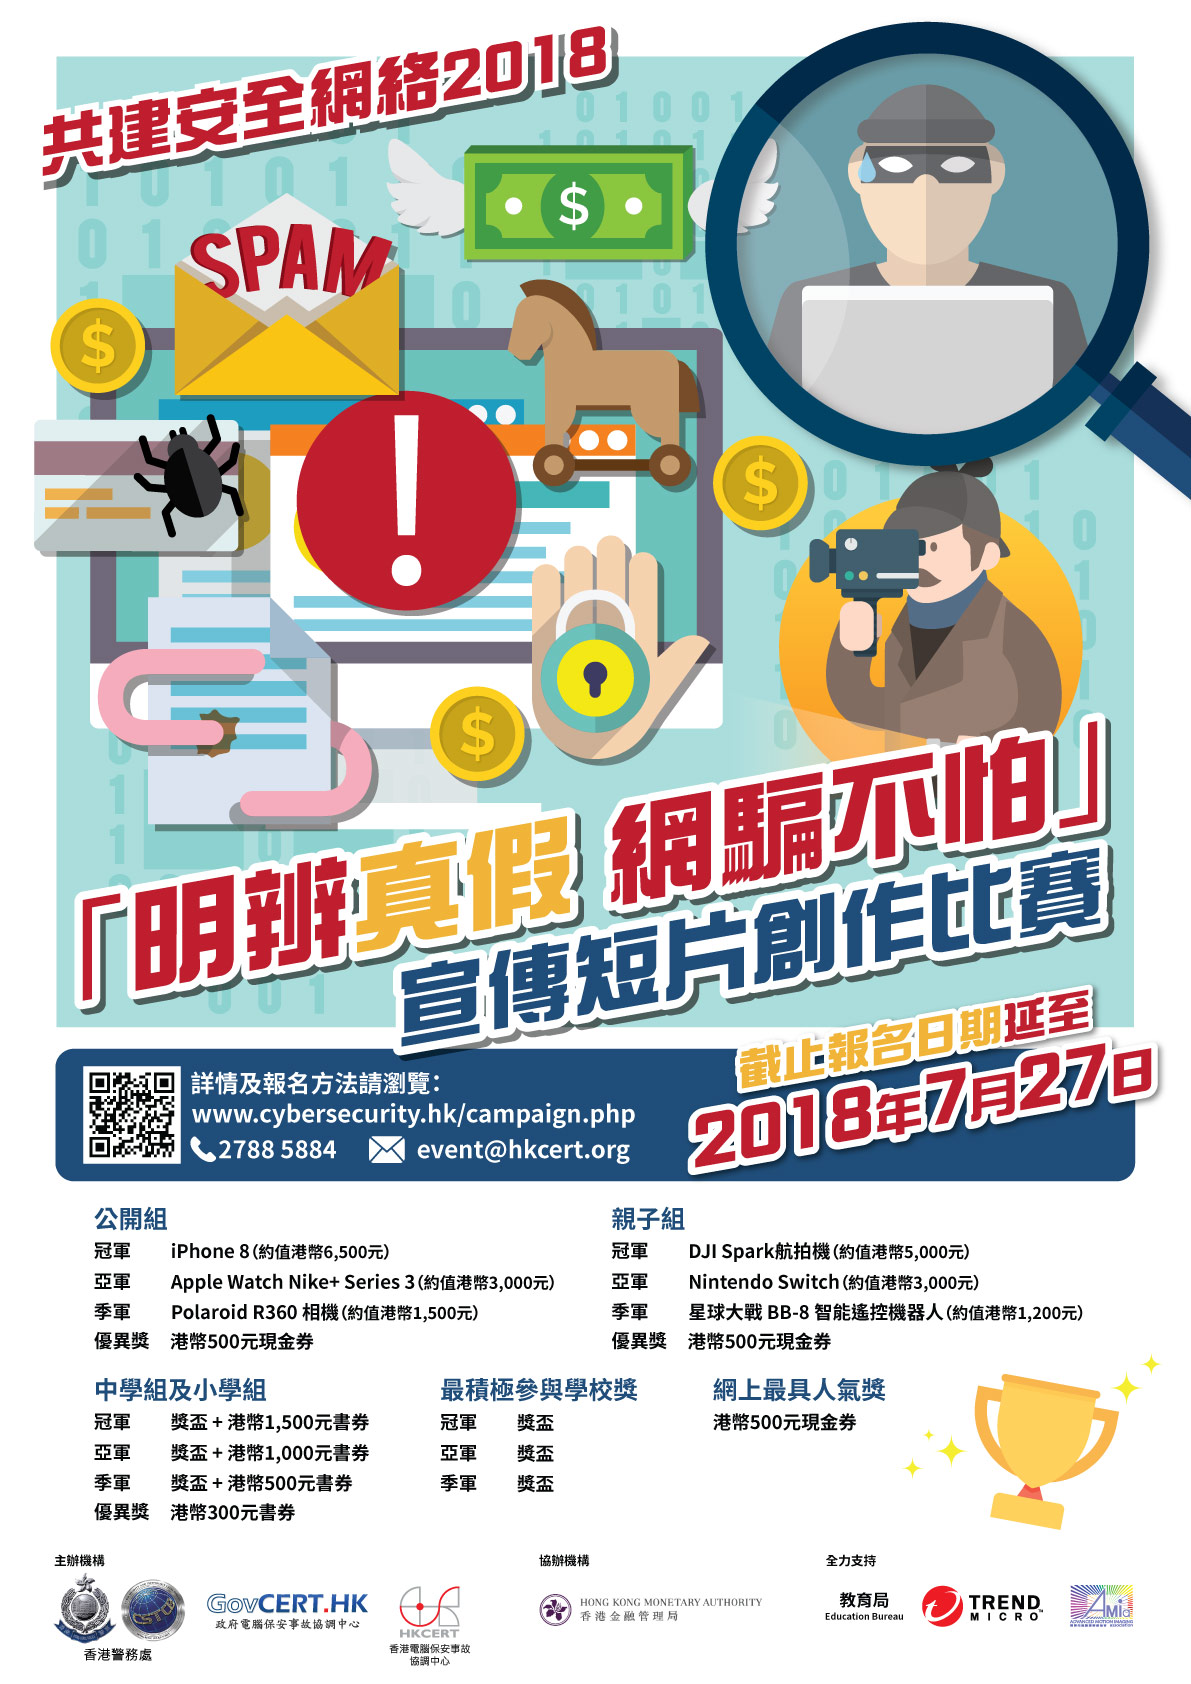 “Poster of “Stay Smart, Keep Cyber Scams Away” Video Ad Contest